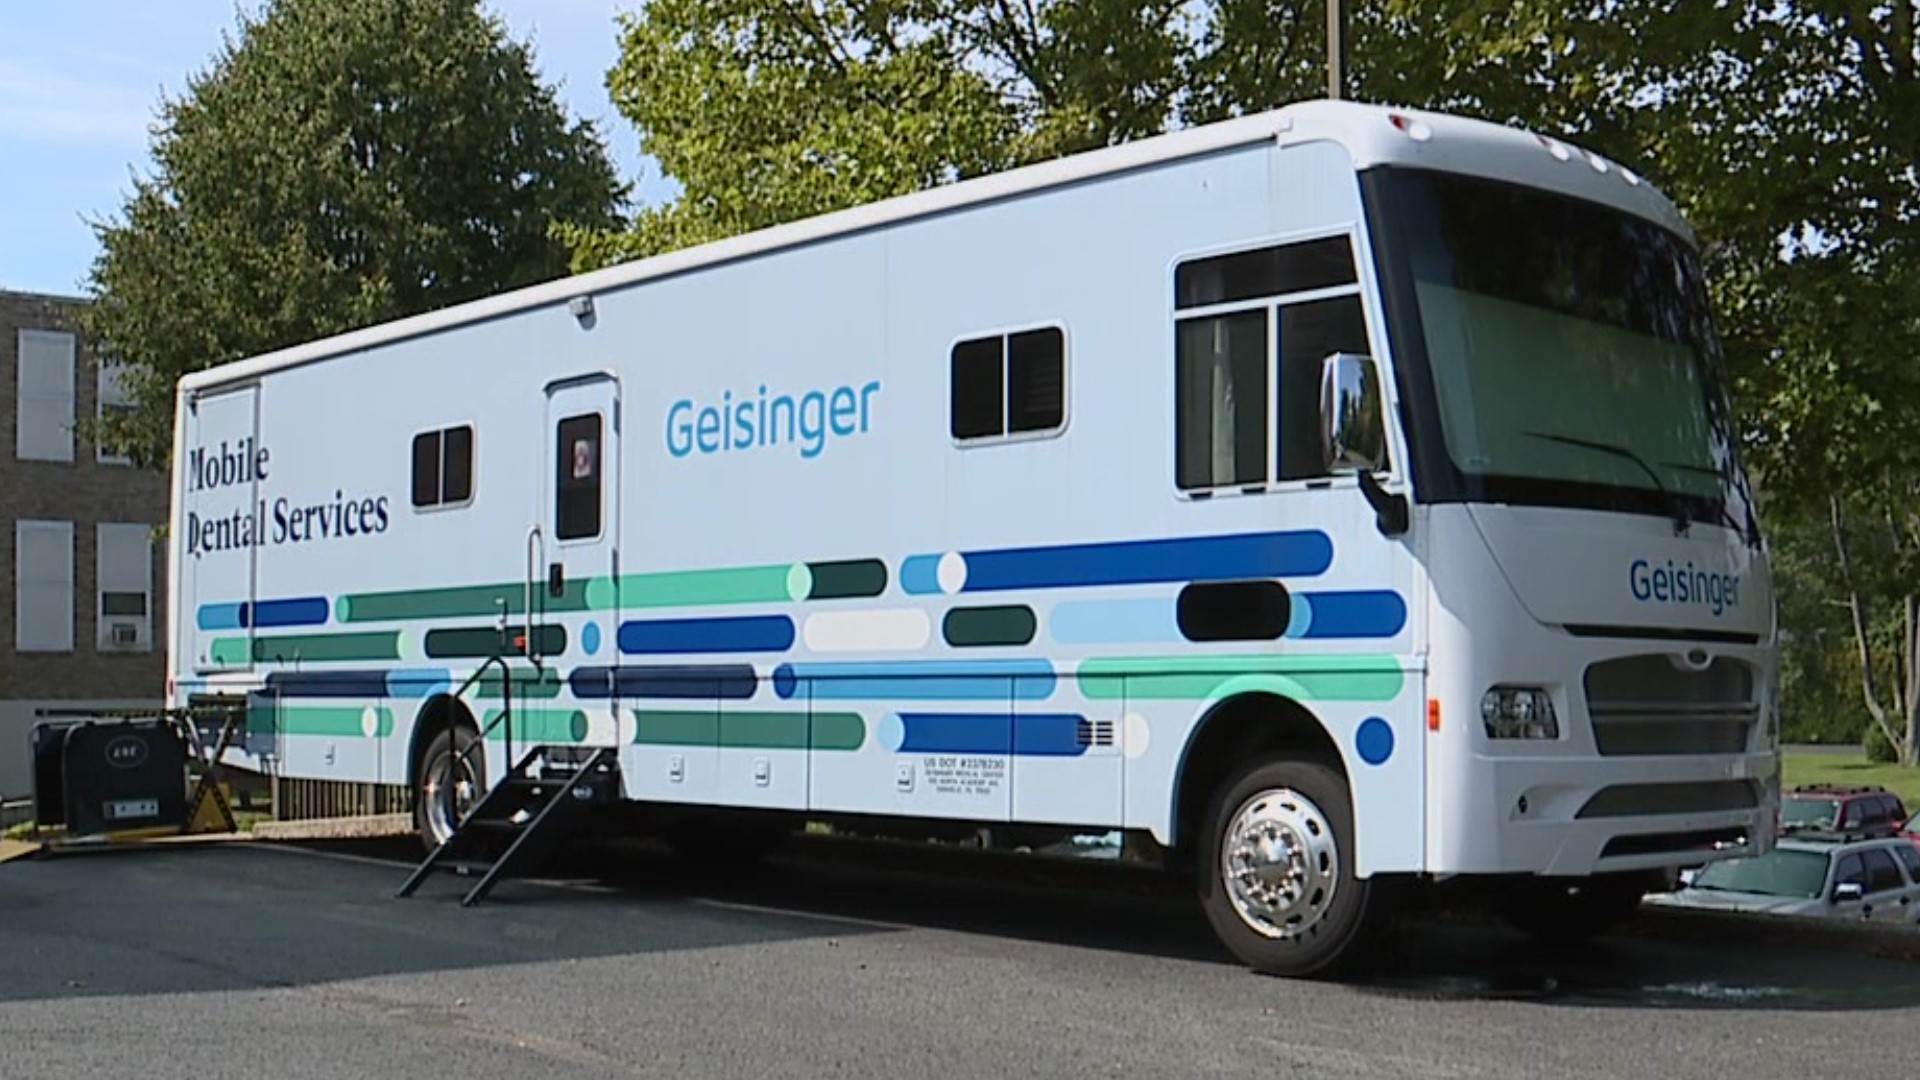 Since June of 2019, Geisinger Health Services has been bringing dental care to those in need, thanks to its mobile dental unit.